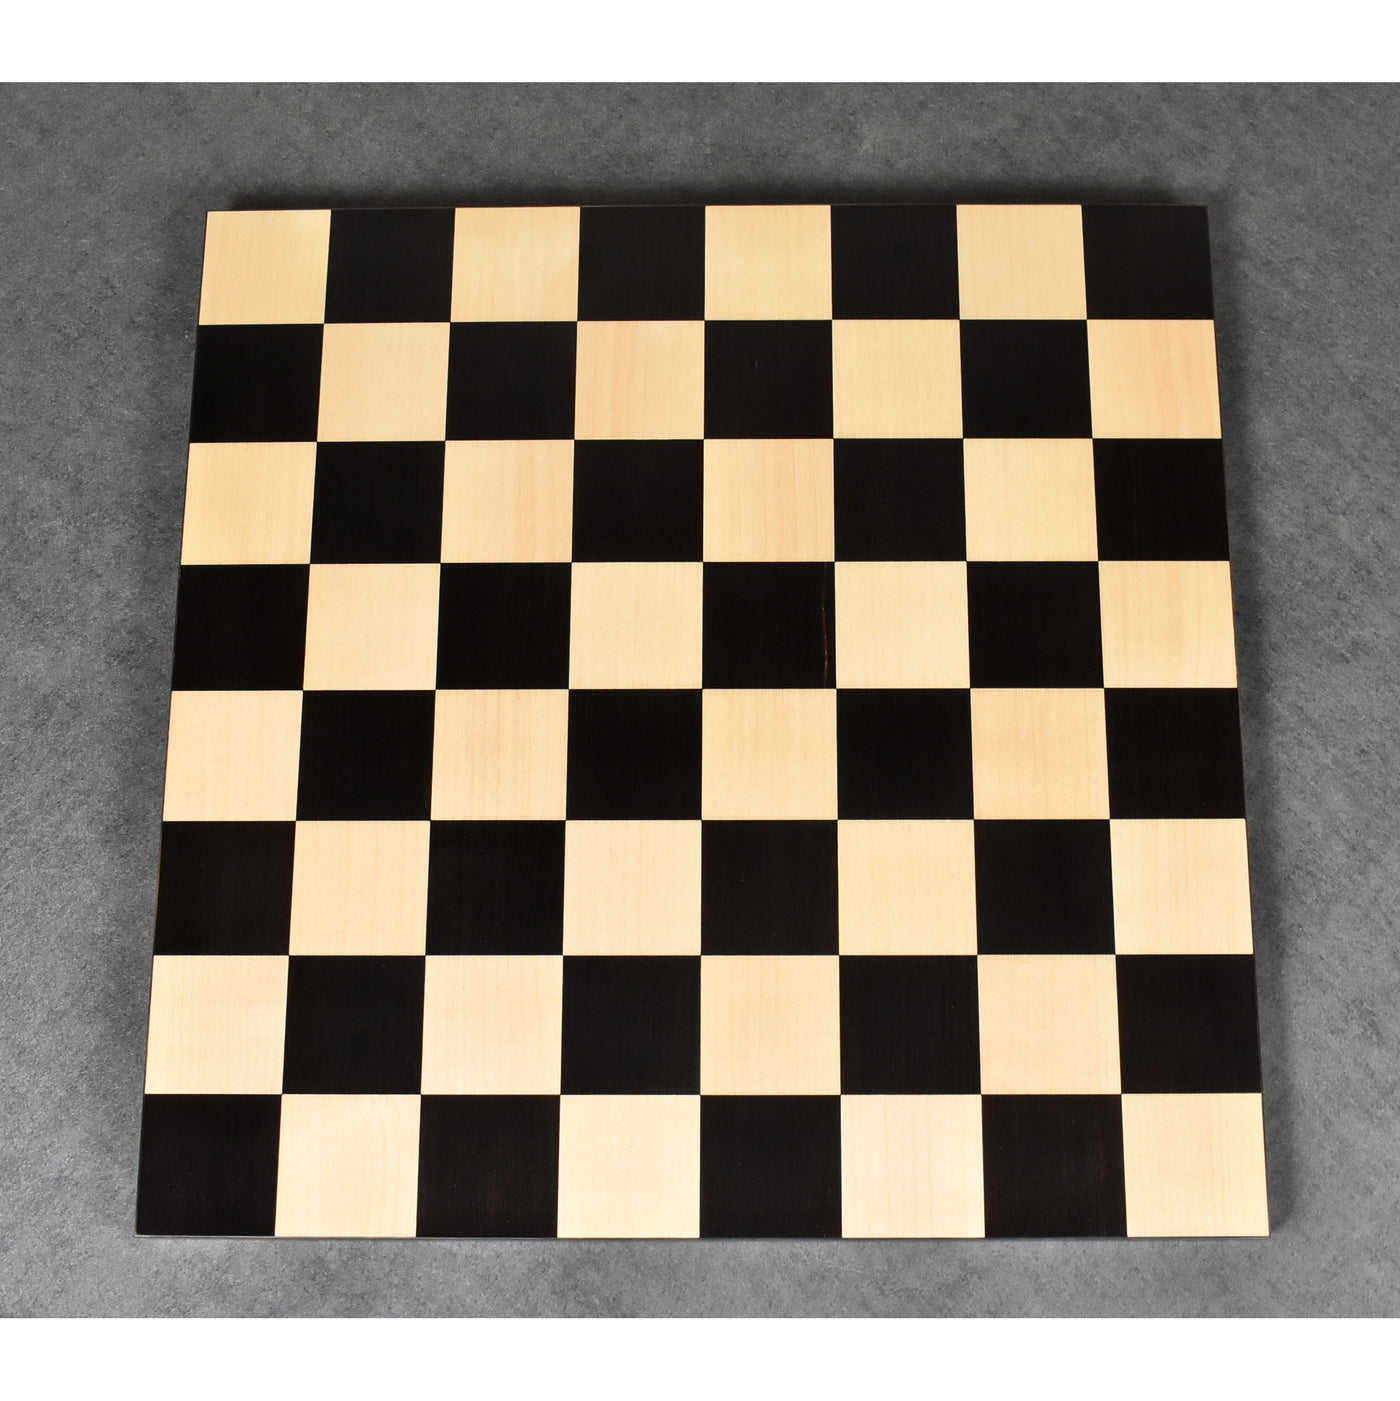 4.1" Texture Painted Staunton Boxwood Chess Pieces with 17.7" Solid Ebony & Maple Wood Board and Leatherette Coffer Storage Box